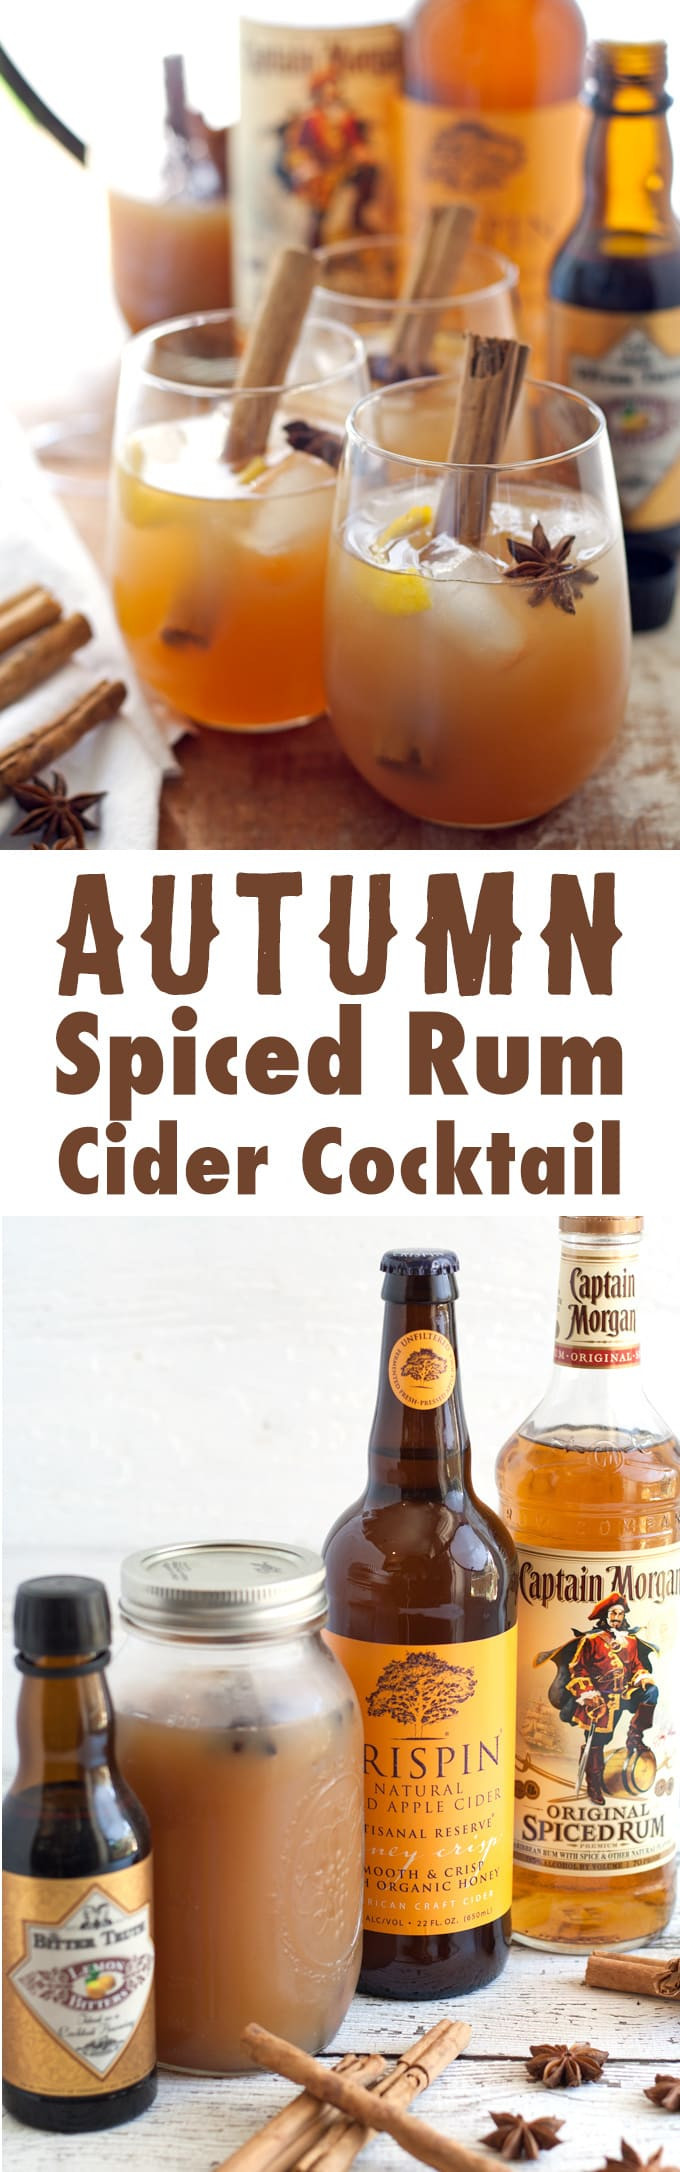 Rum Drinks For Fall
 Autumn Spiced Rum Cider Cocktail Honey and Birch